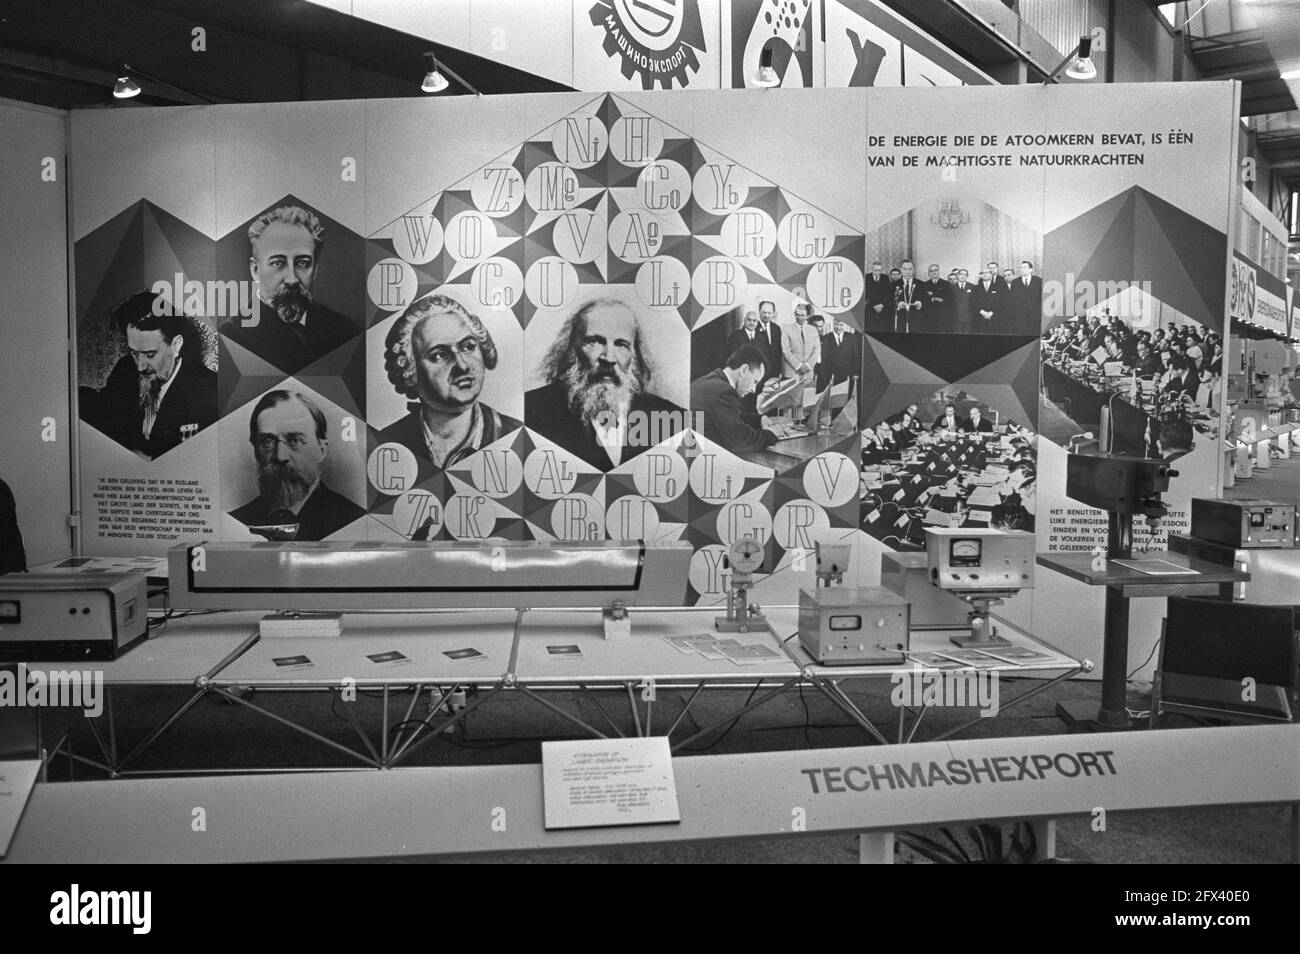 Presentation of Russian (atomic) technology, May 24, 1972, trade fairs, economy, trade, international relations, nuclear energy, portraits, The Netherlands, 20th century press agency photo, news to remember, documentary, historic photography 1945-1990, visual stories, human history of the Twentieth Century, capturing moments in time Stock Photo